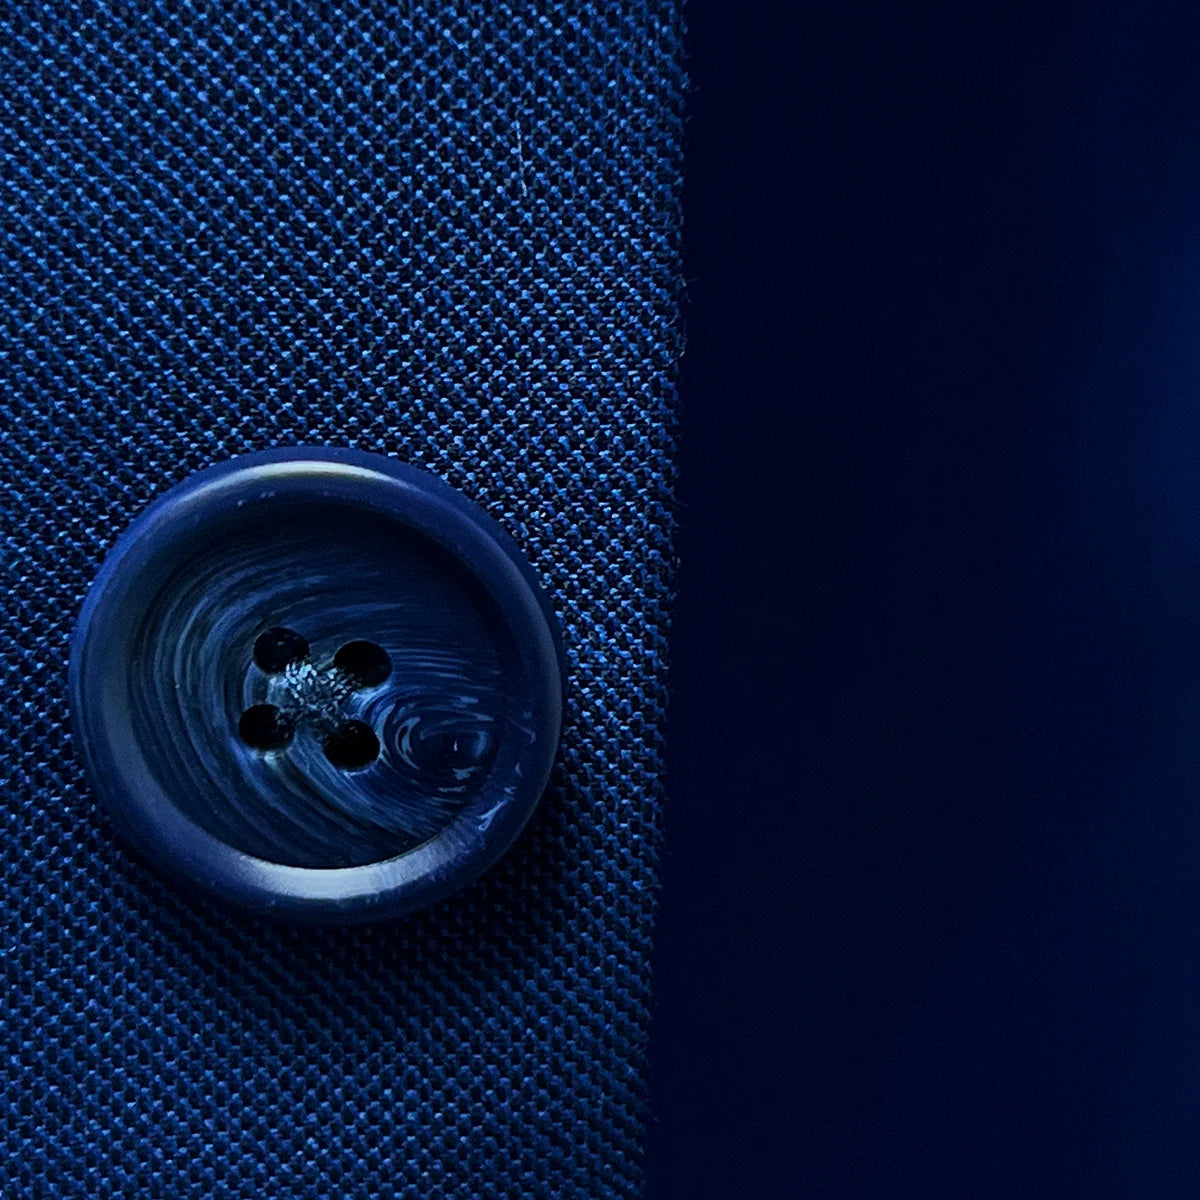 Image featuring the sophisticated blue marble horn buttons on the cobalt blue sharkskin suit.